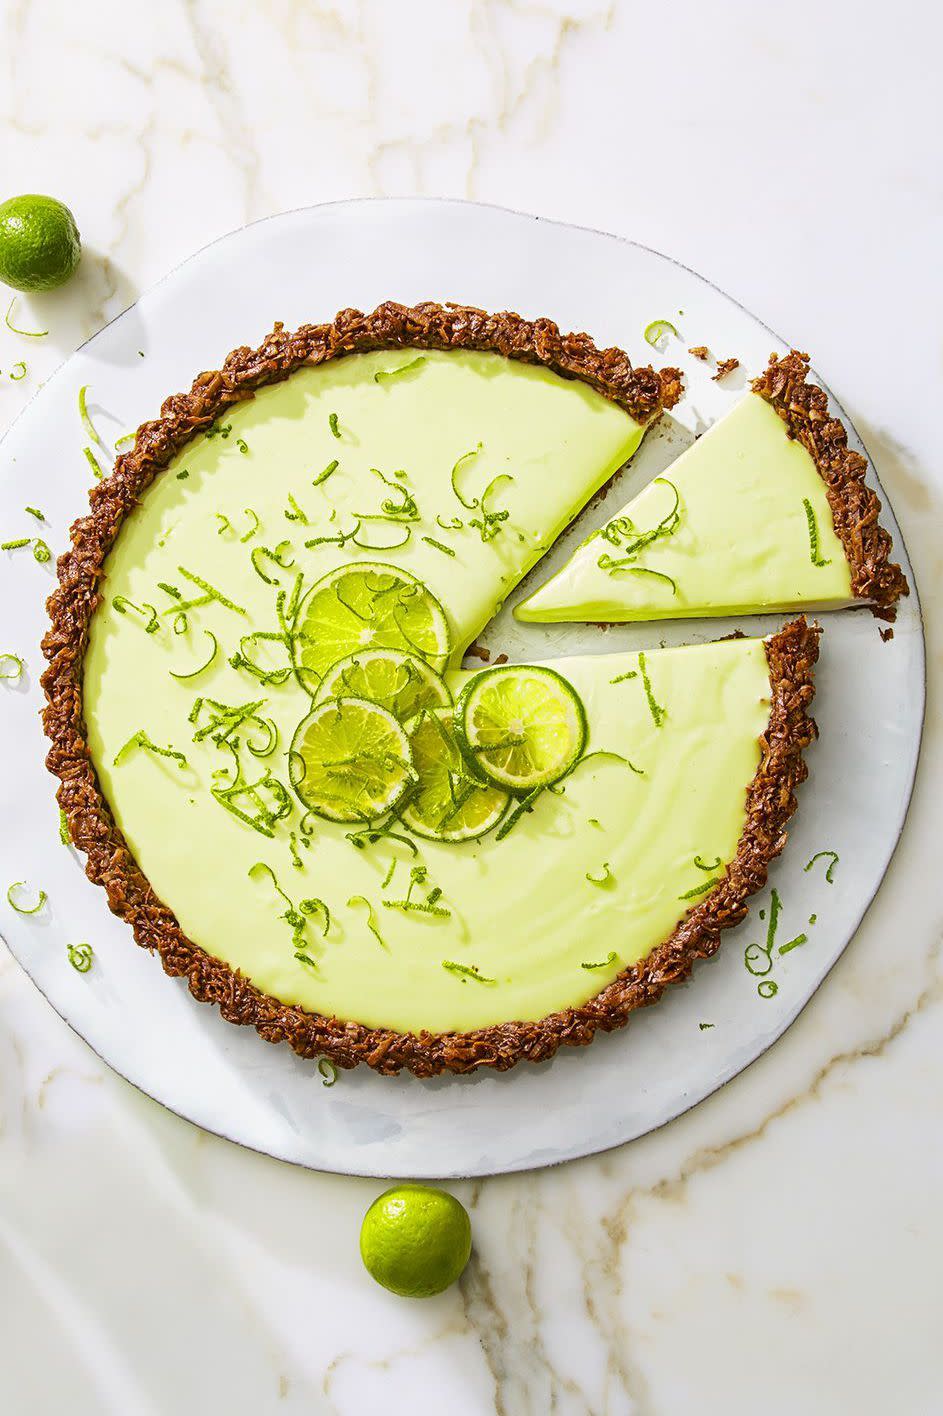 cocoa nutty lime tart with slices of lime on top